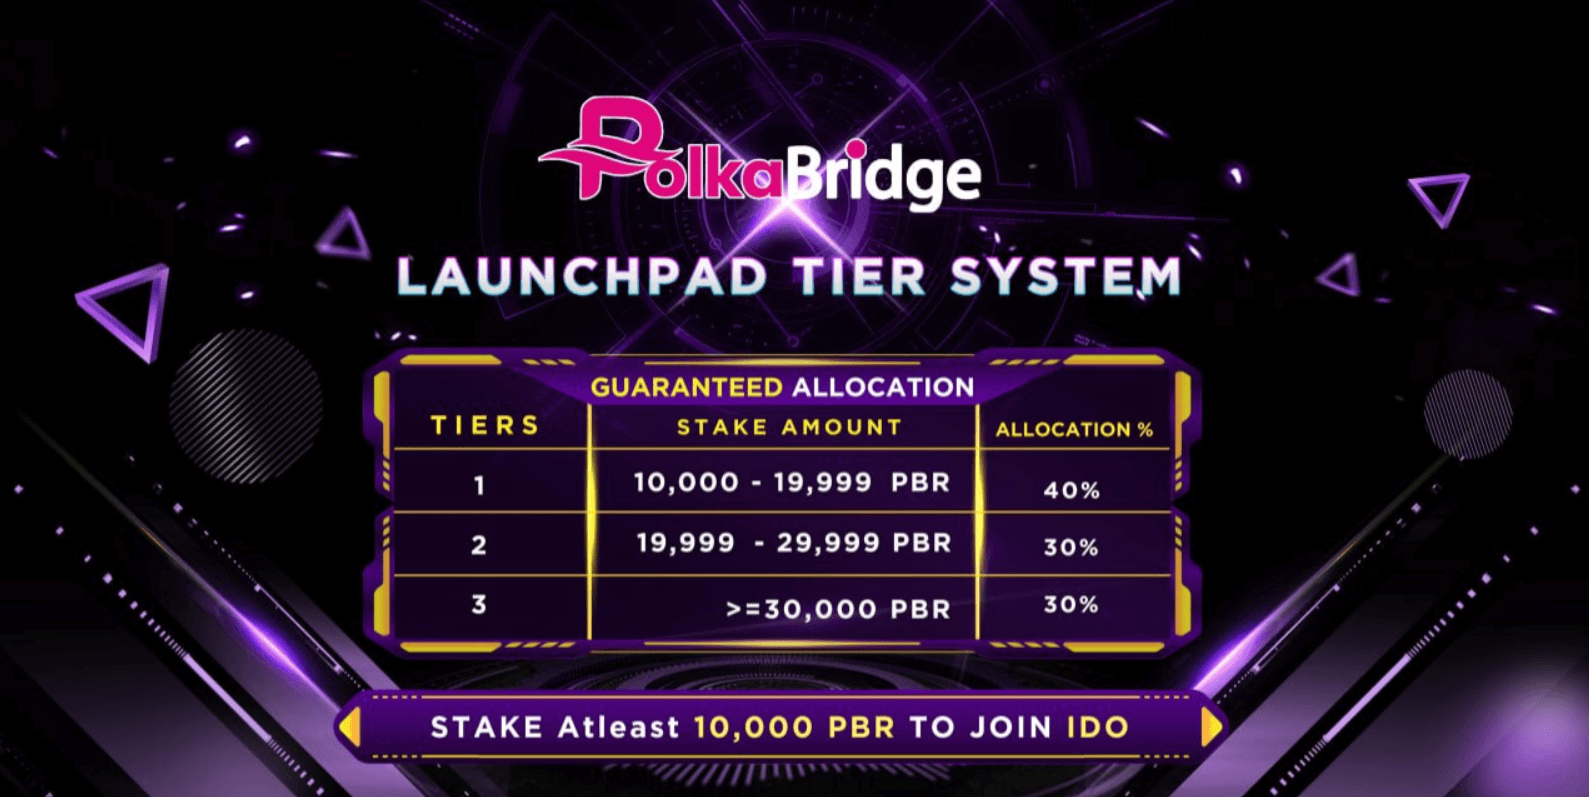 The launchpad tier system of the PolkaBridge IDO launchpad.